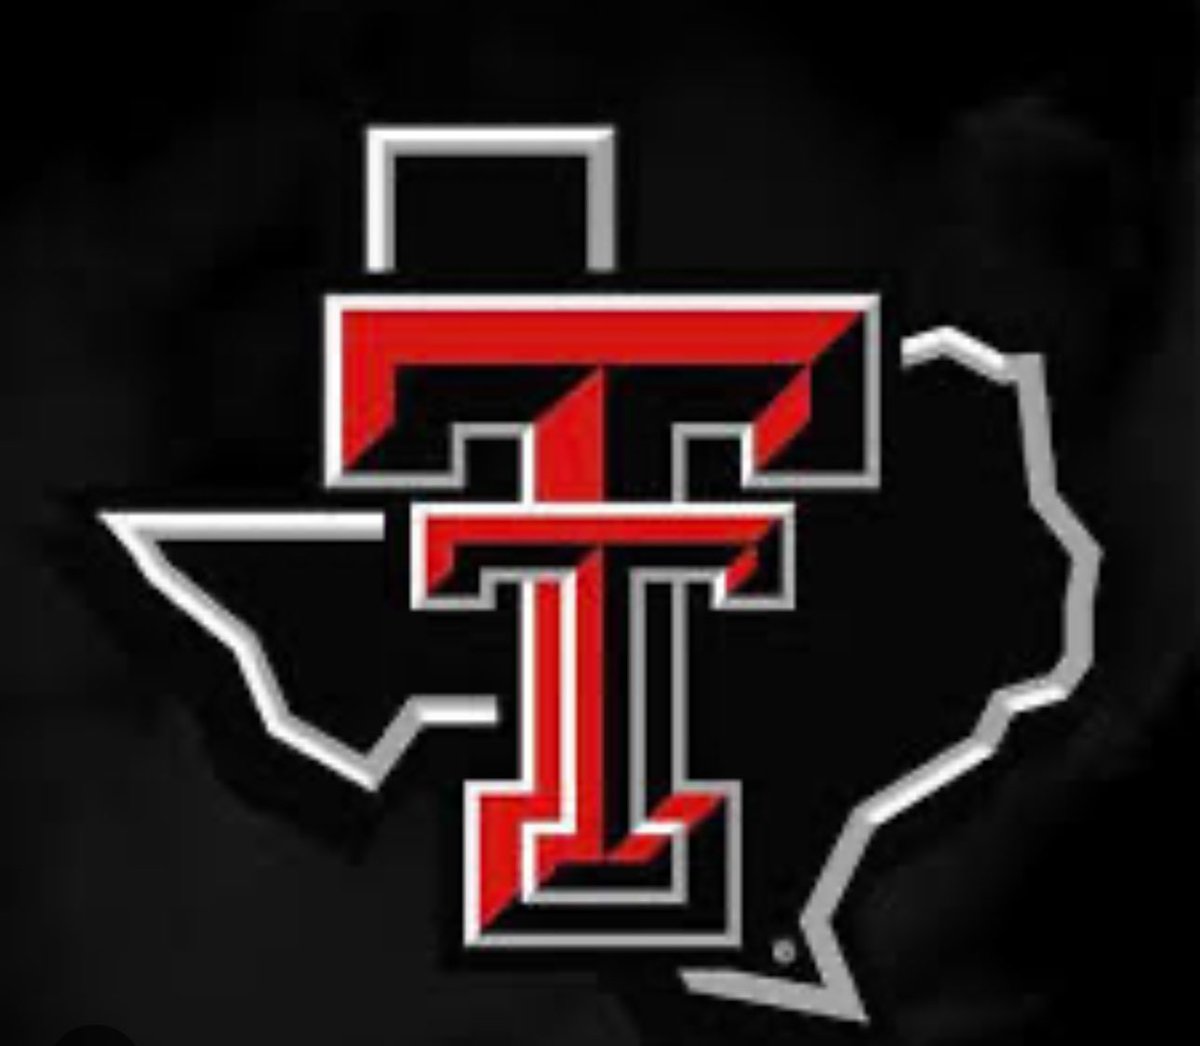 After a talk with coach @jkbtjc_53 i am blessed to receive my first offer from Texas Tech University @coachbmorgan @nunnal39 @kmangum409 #AGTG